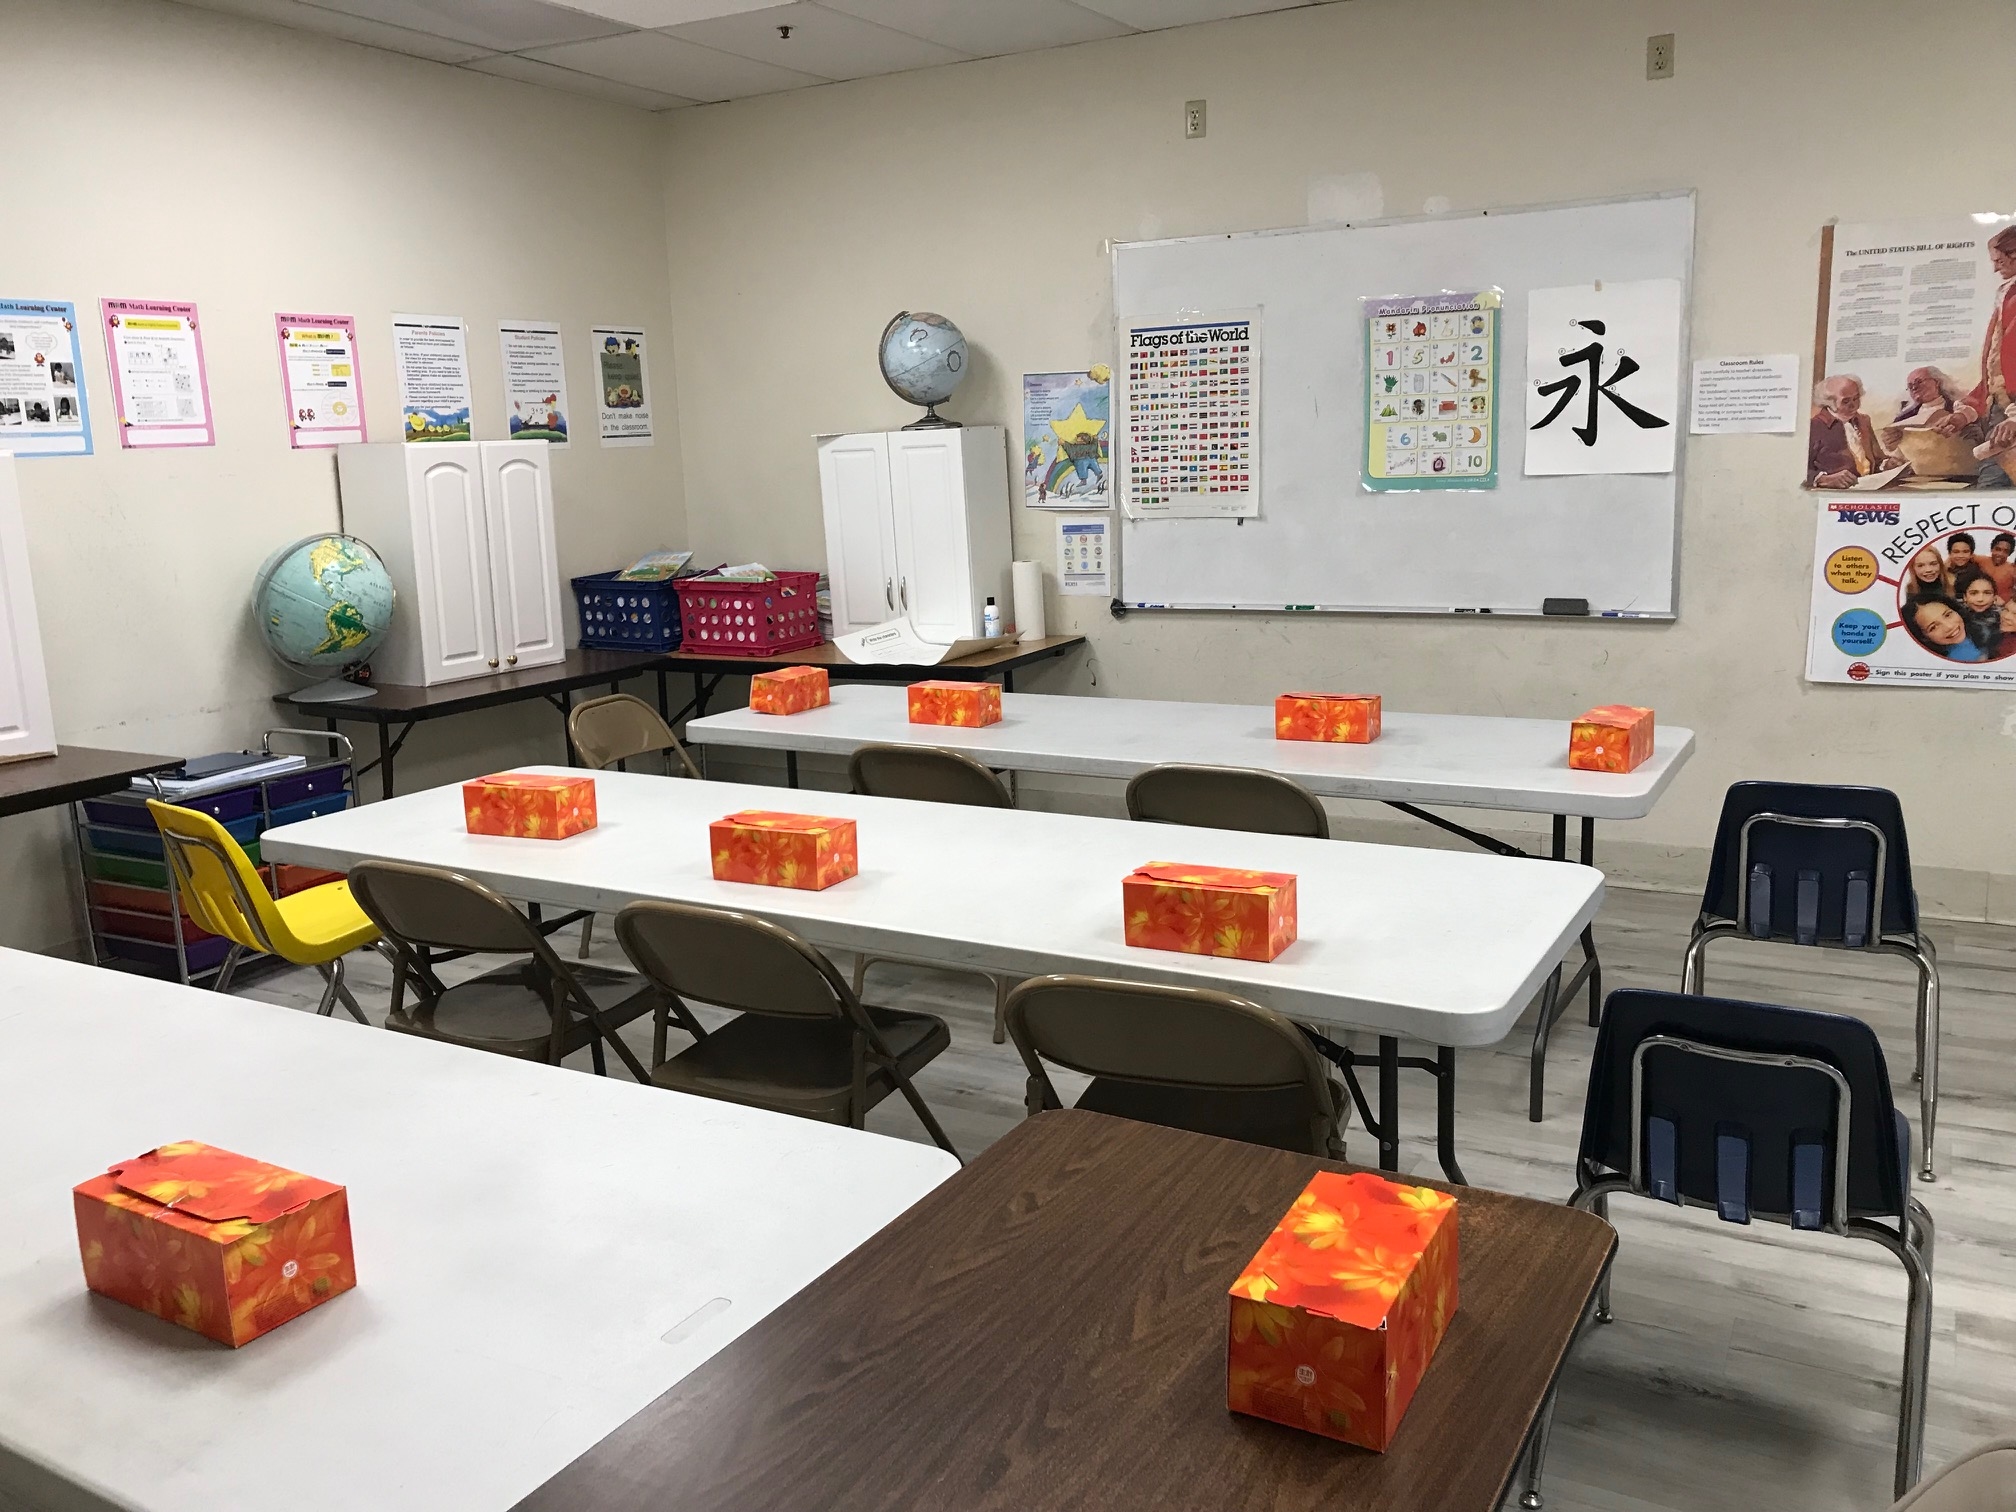 The environment of the learning center. <br>教室環境